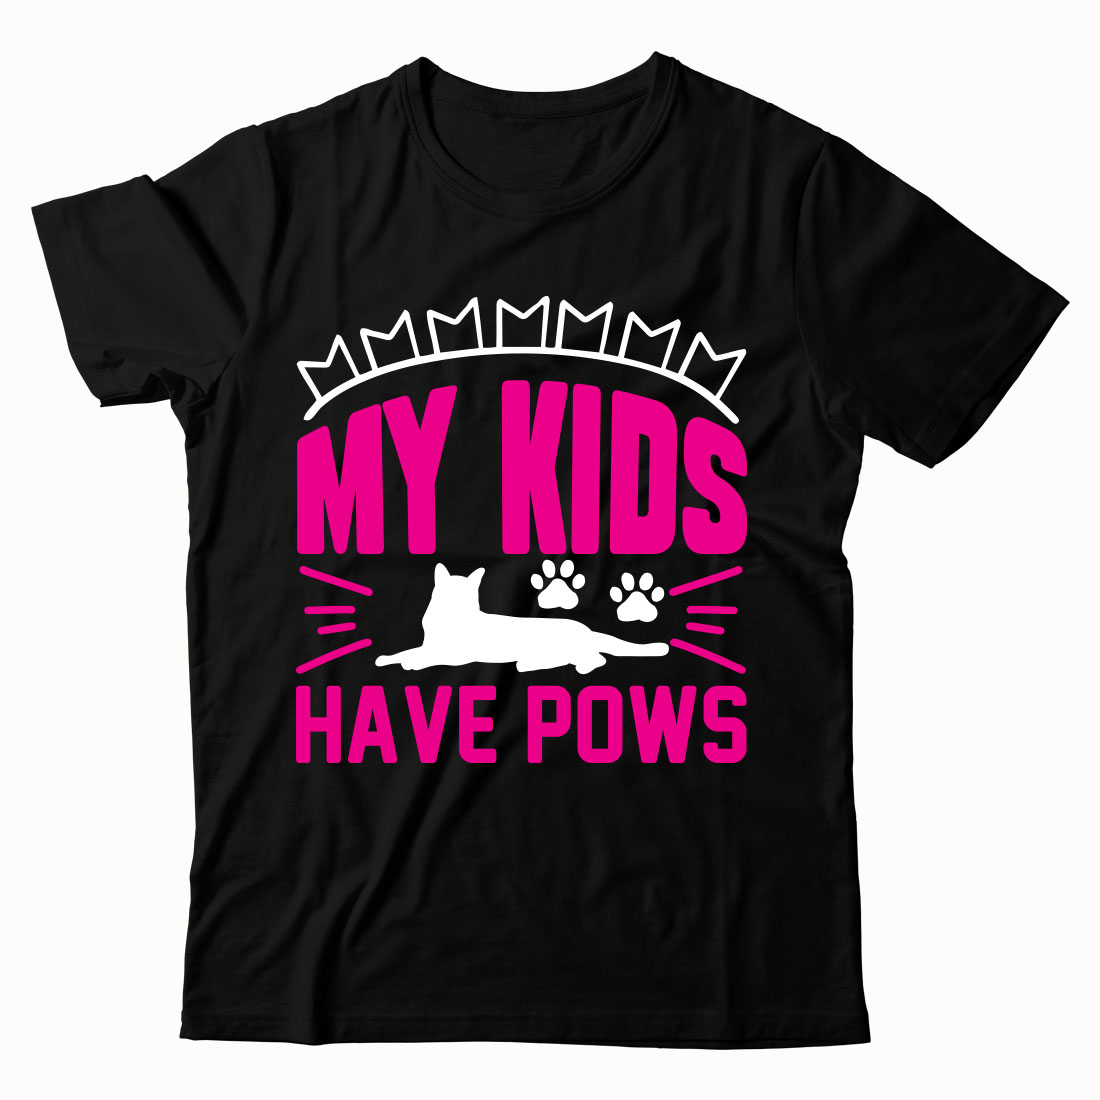 Black t - shirt with pink lettering that says.